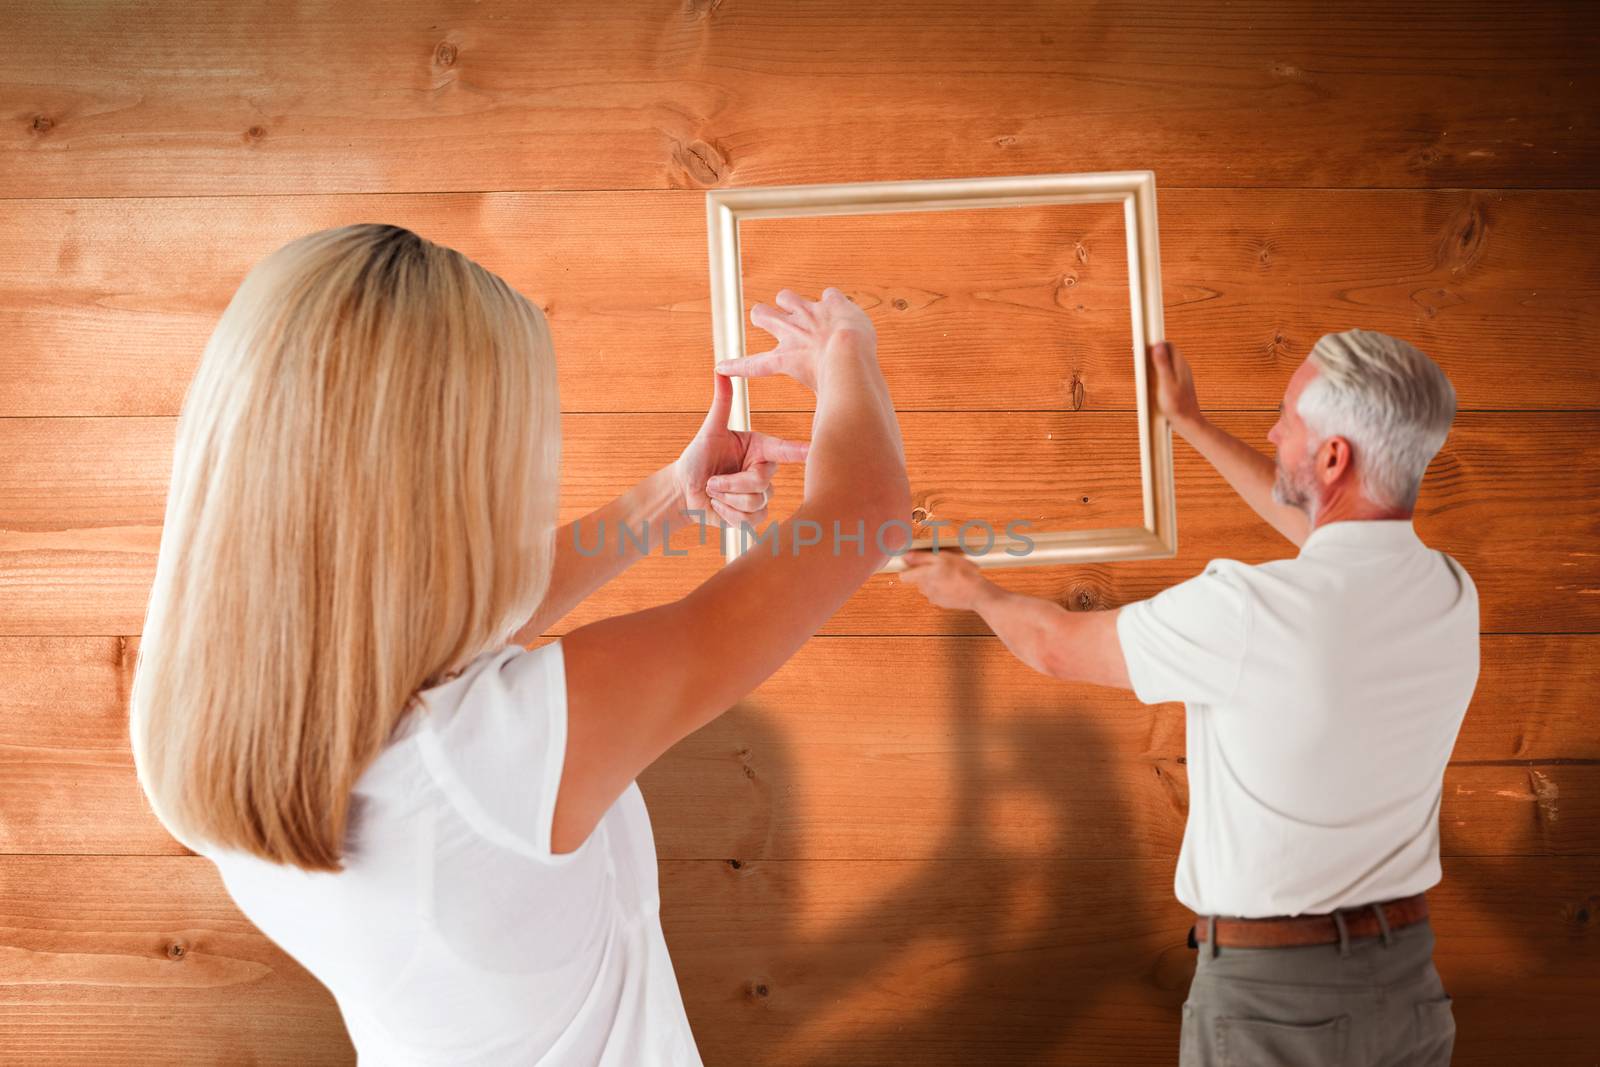 Couple hanging a frame together against overhead of wooden planks